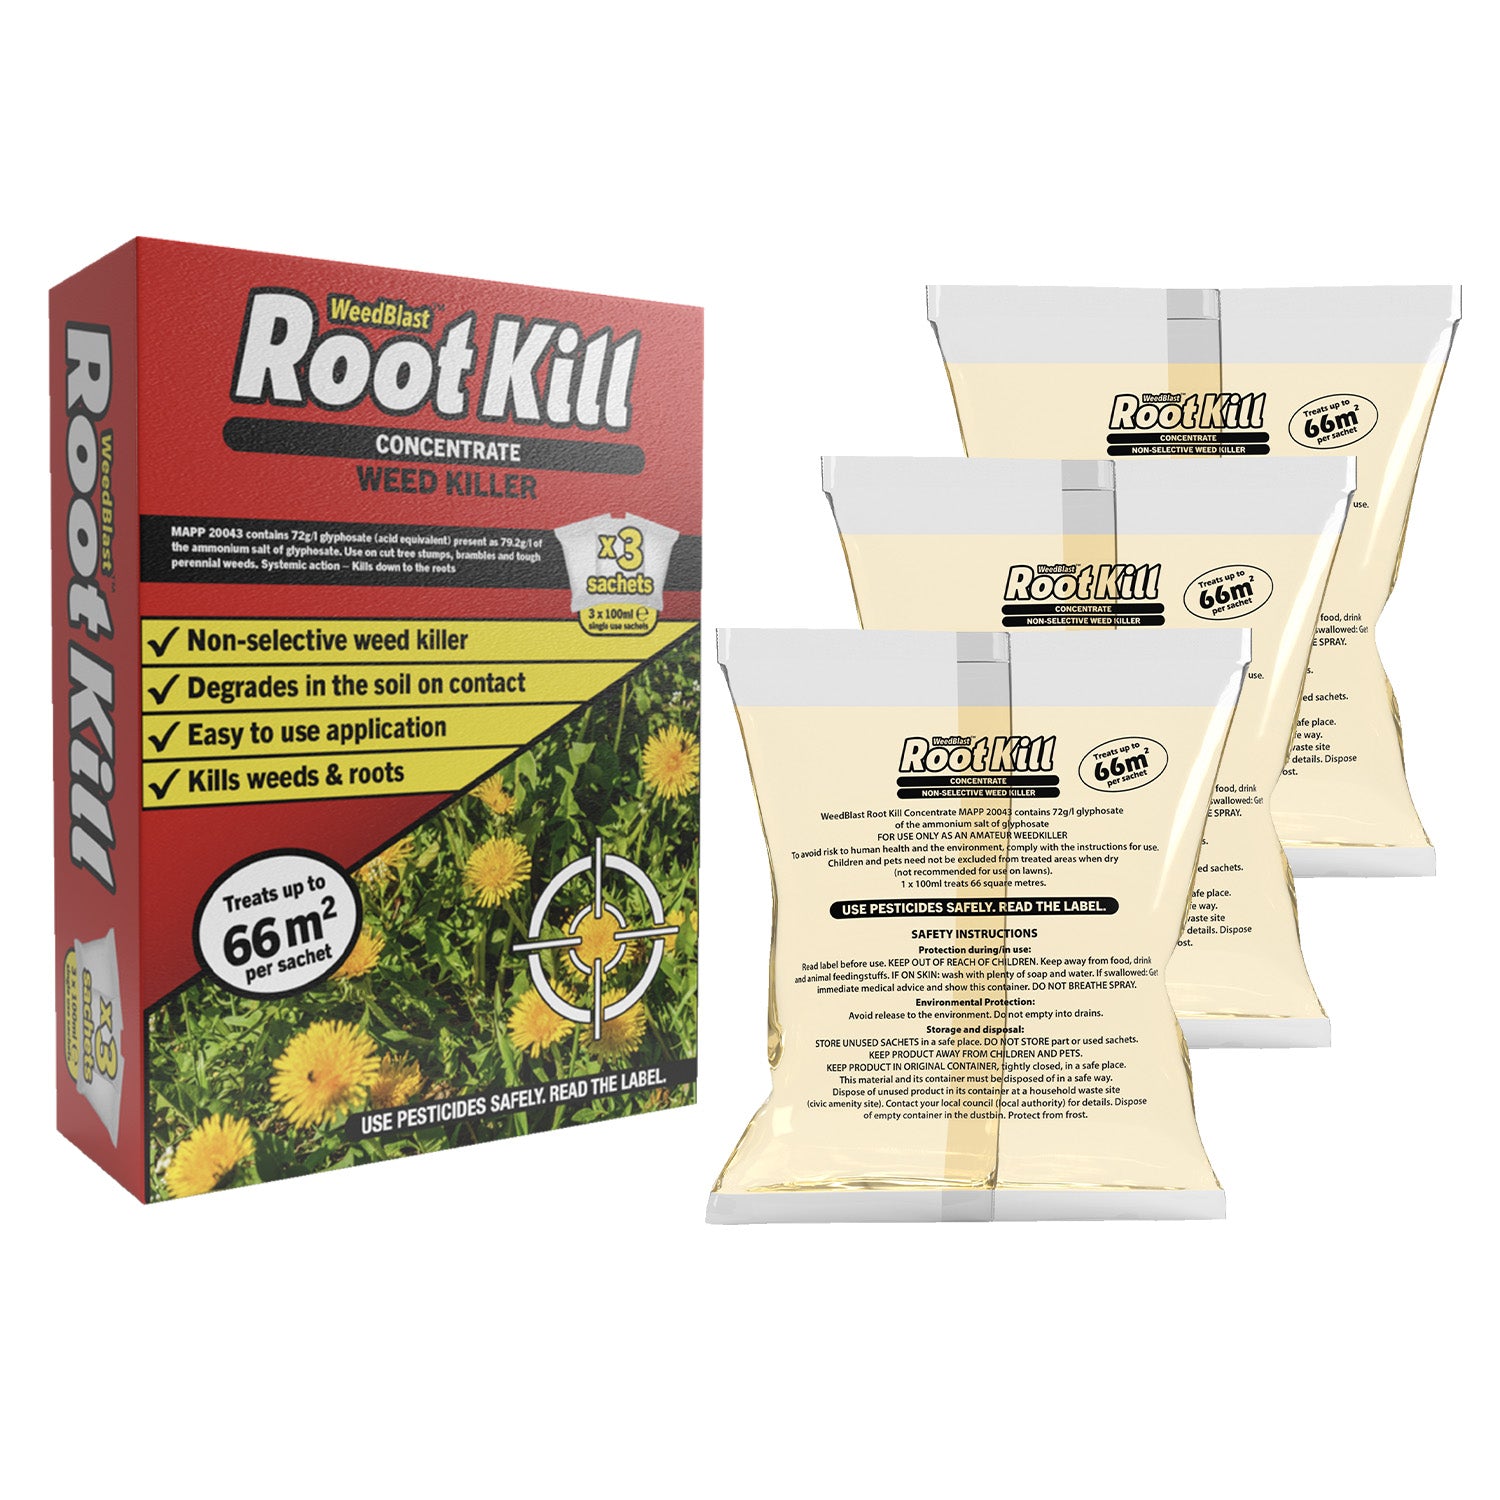 Weedblast Rootkill Concentrated Weedkiller 3 x 100 Sachets boxed